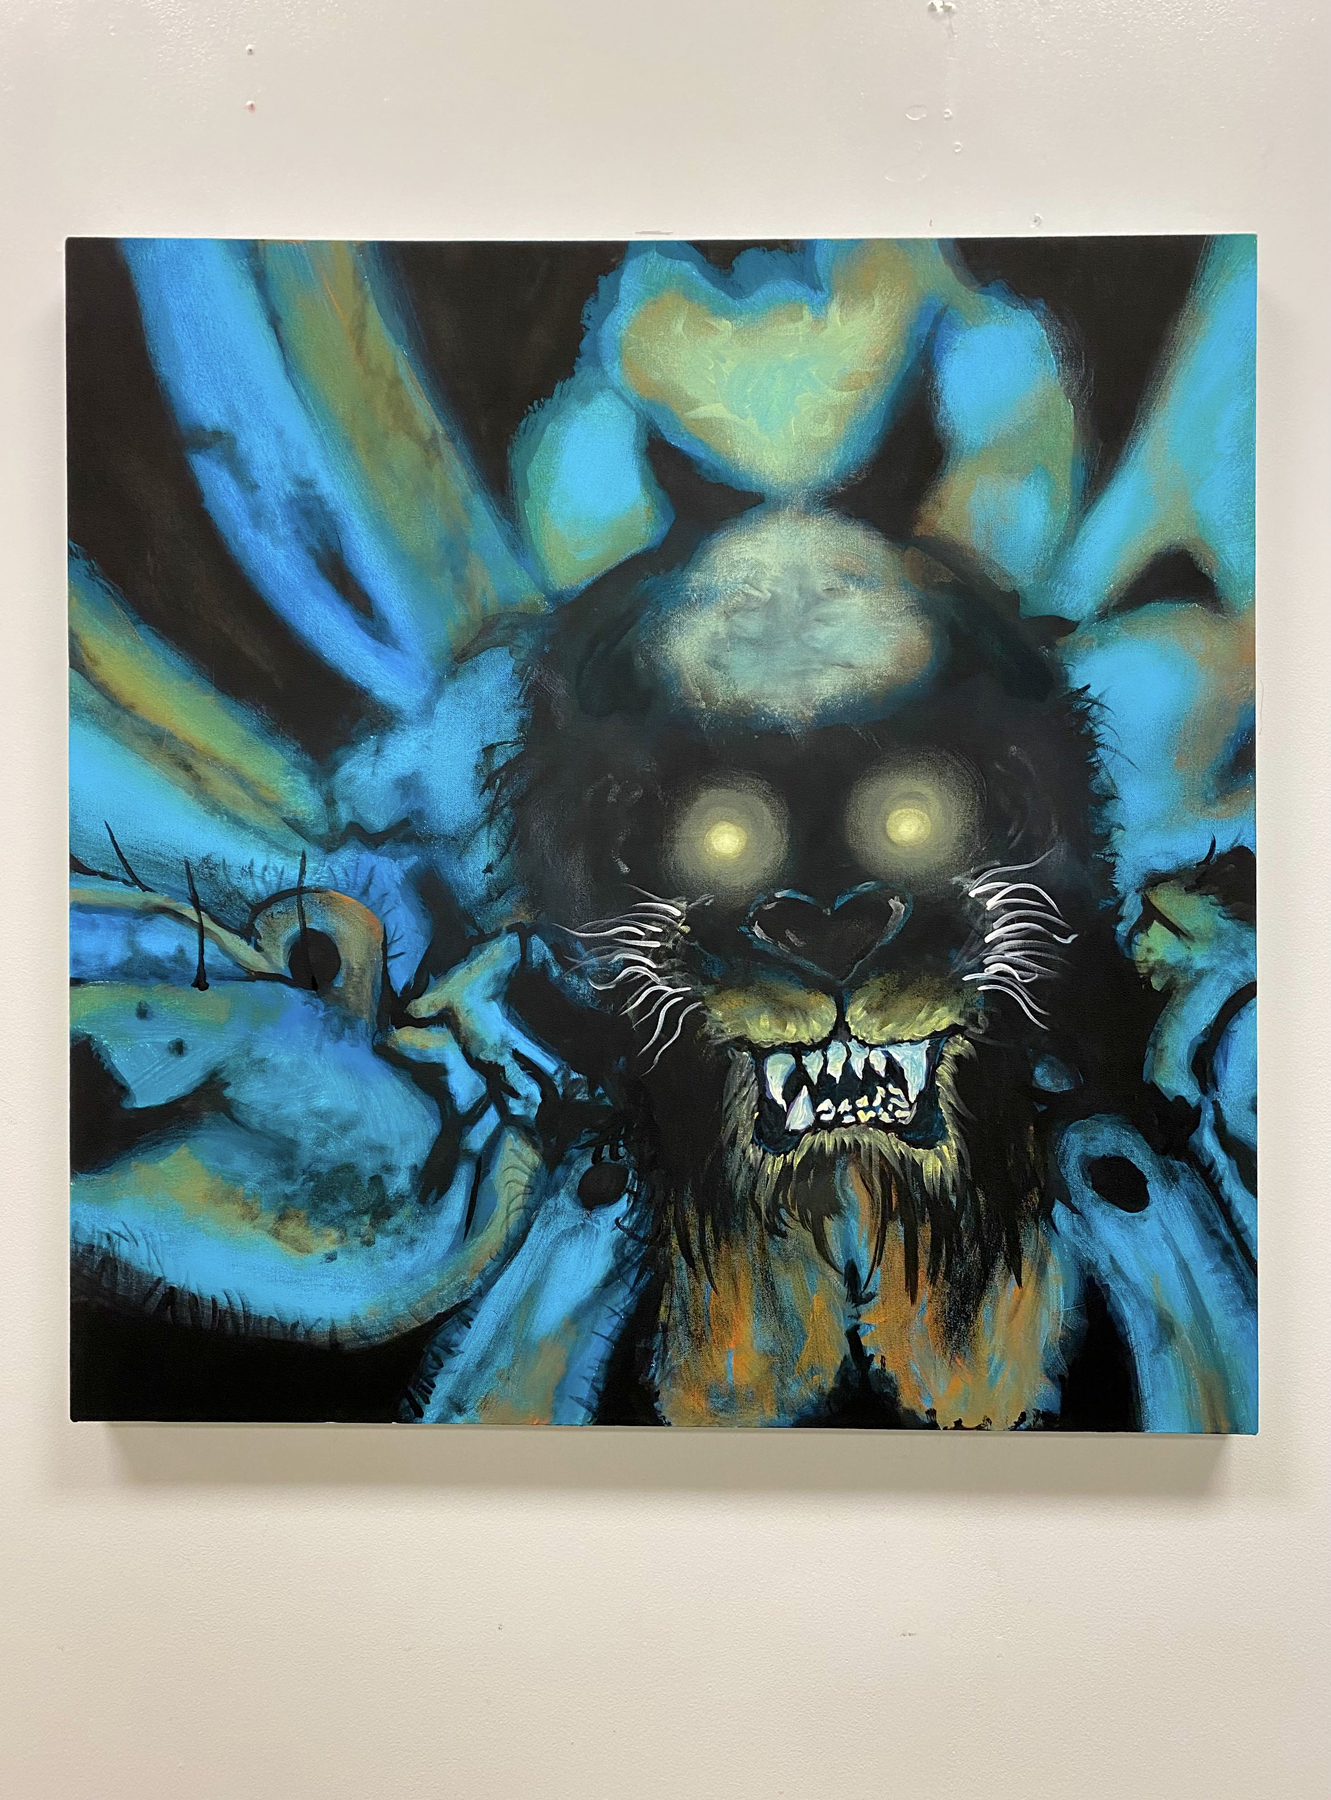 The head of a snarling, wolf-like figure with glowing yellow eyes emerges from a blurry black and blue background with yellow-orange highlights 